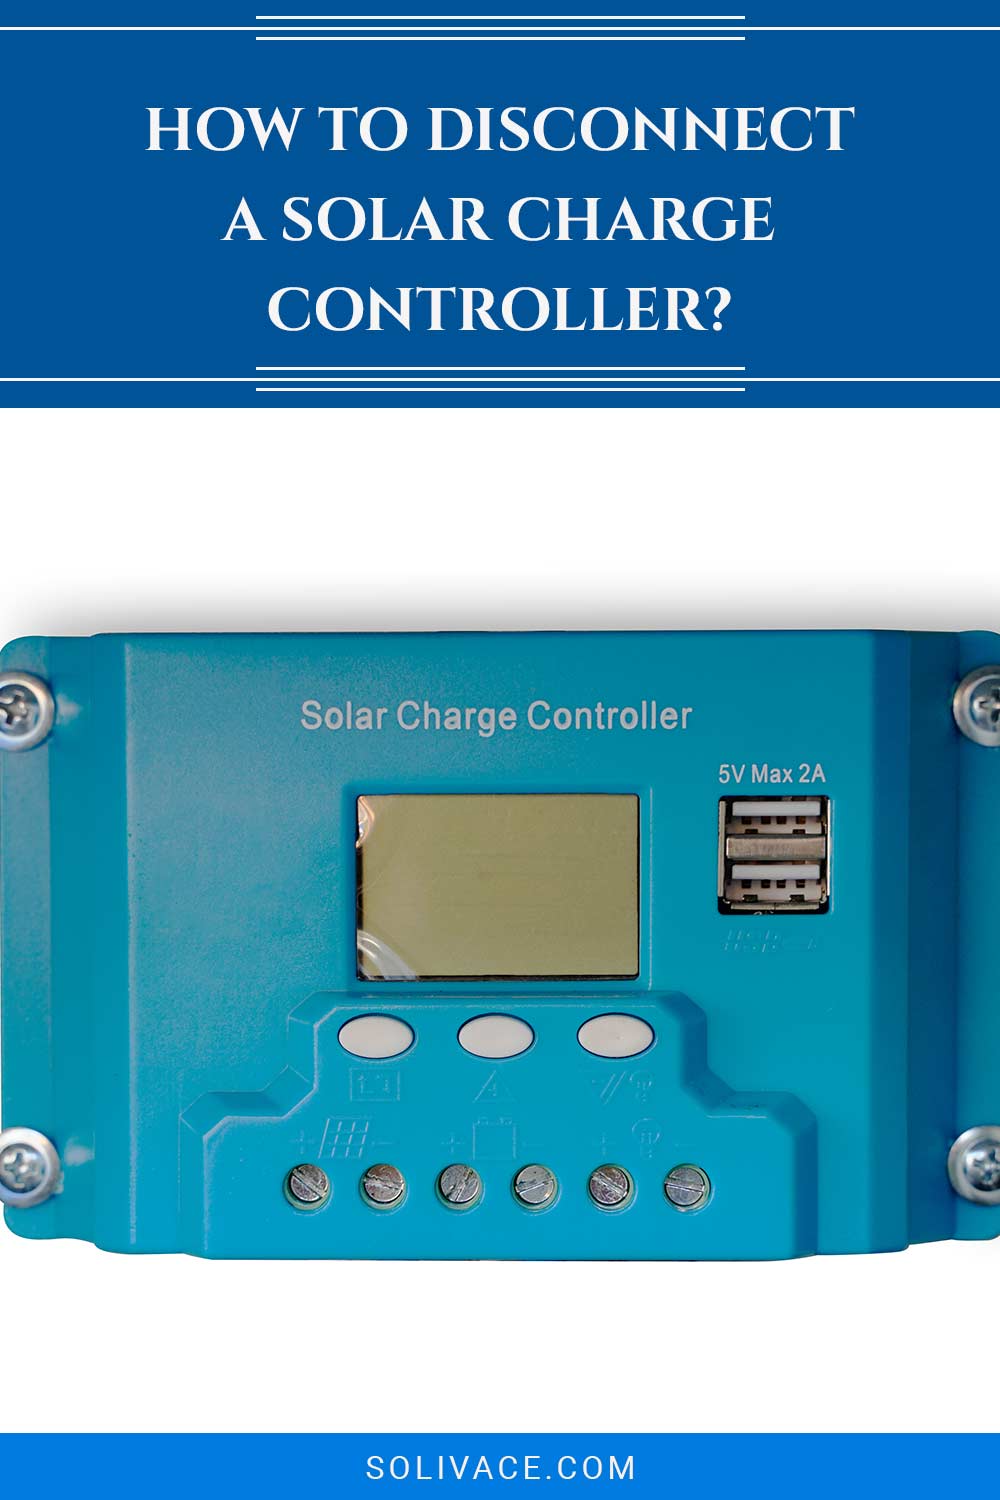 A blue solar charge controller - How To Disconnect?